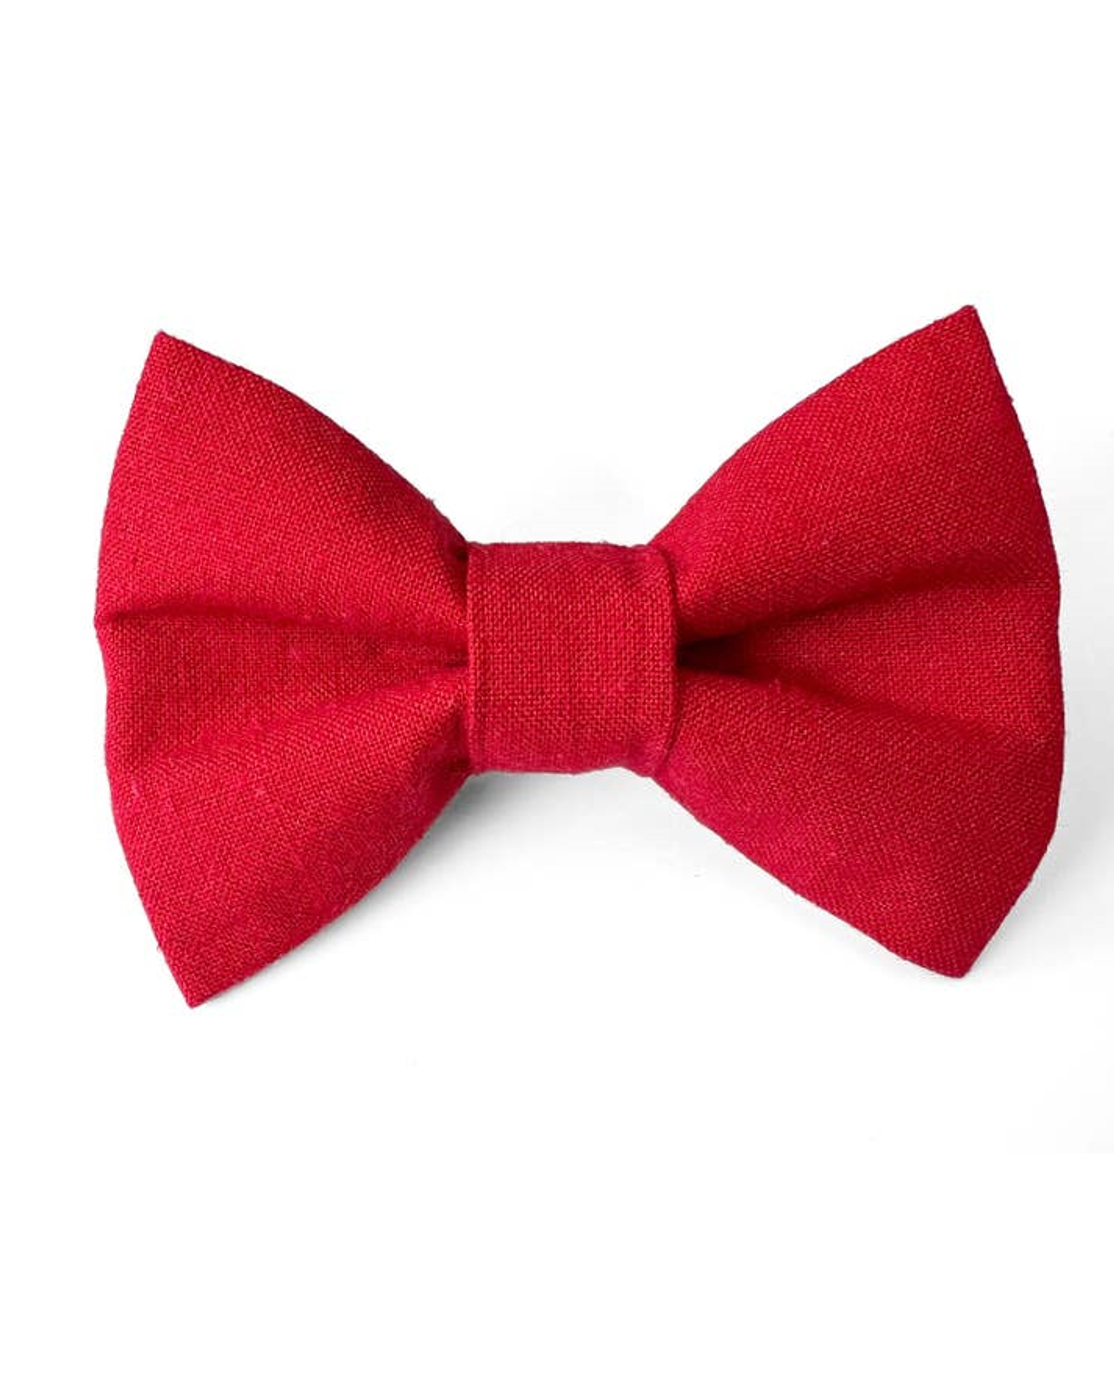 Take a Bow Red Linen Bow Tie